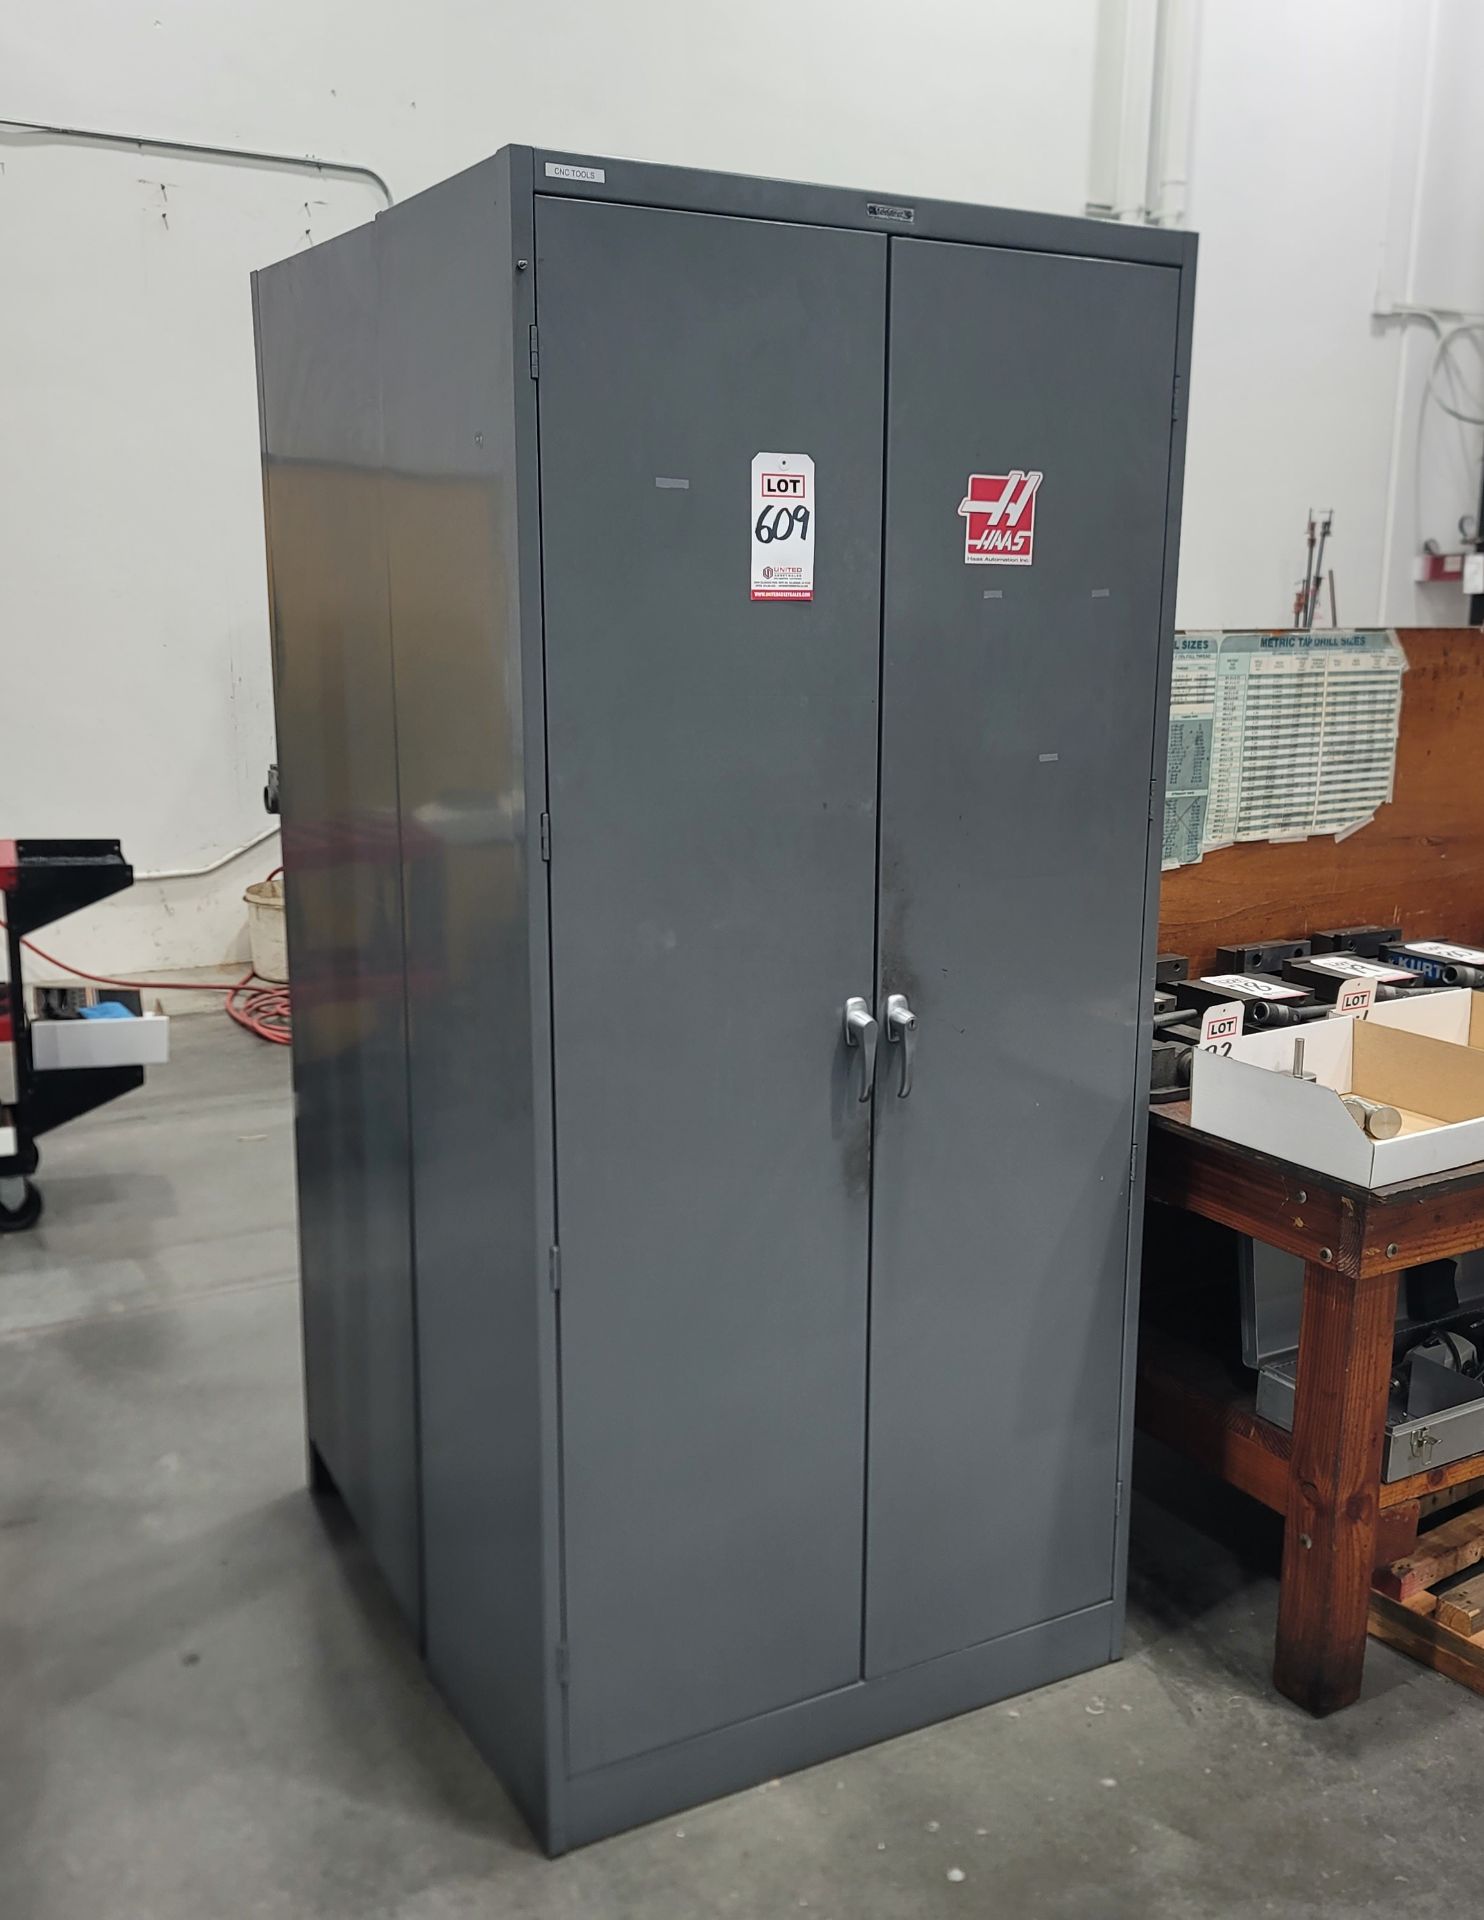 2-DOOR STORAGE CABINET, 3' X 18" X 78" HT, CONTENTS NOT INCLUDED, (DELAYED PICKUP UNTIL THURSDAY,